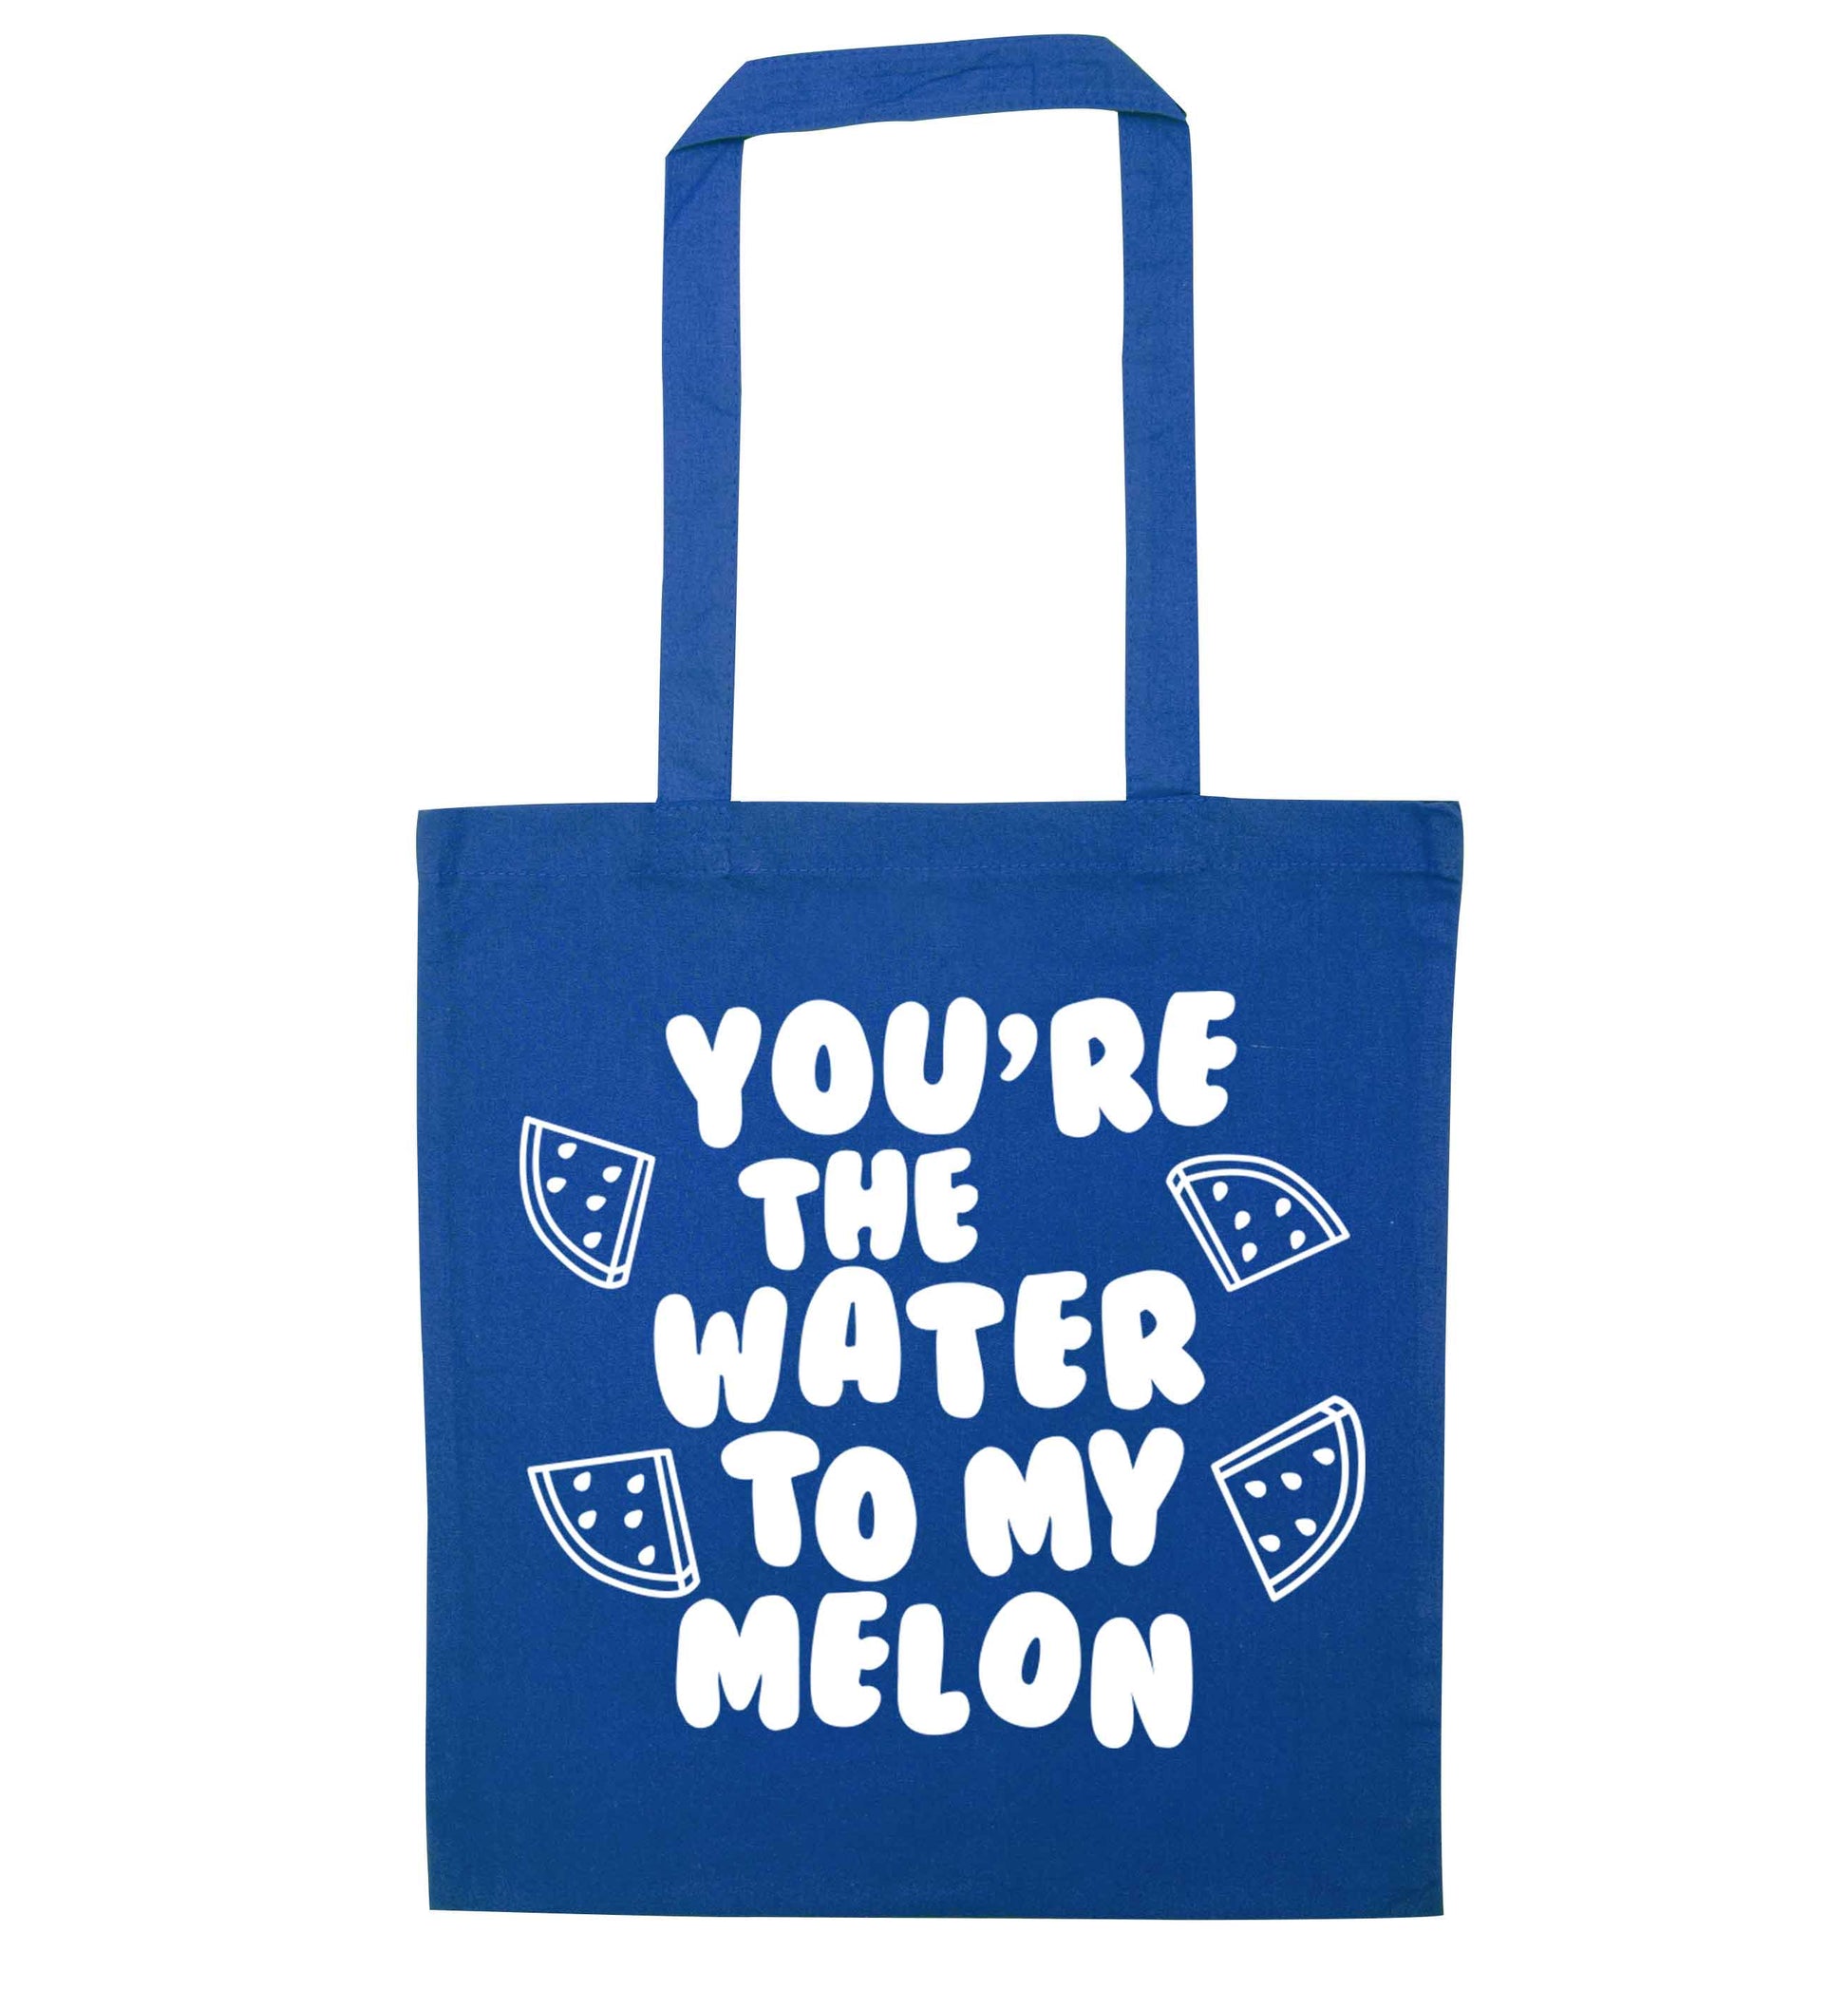 You're the water to my melon blue tote bag